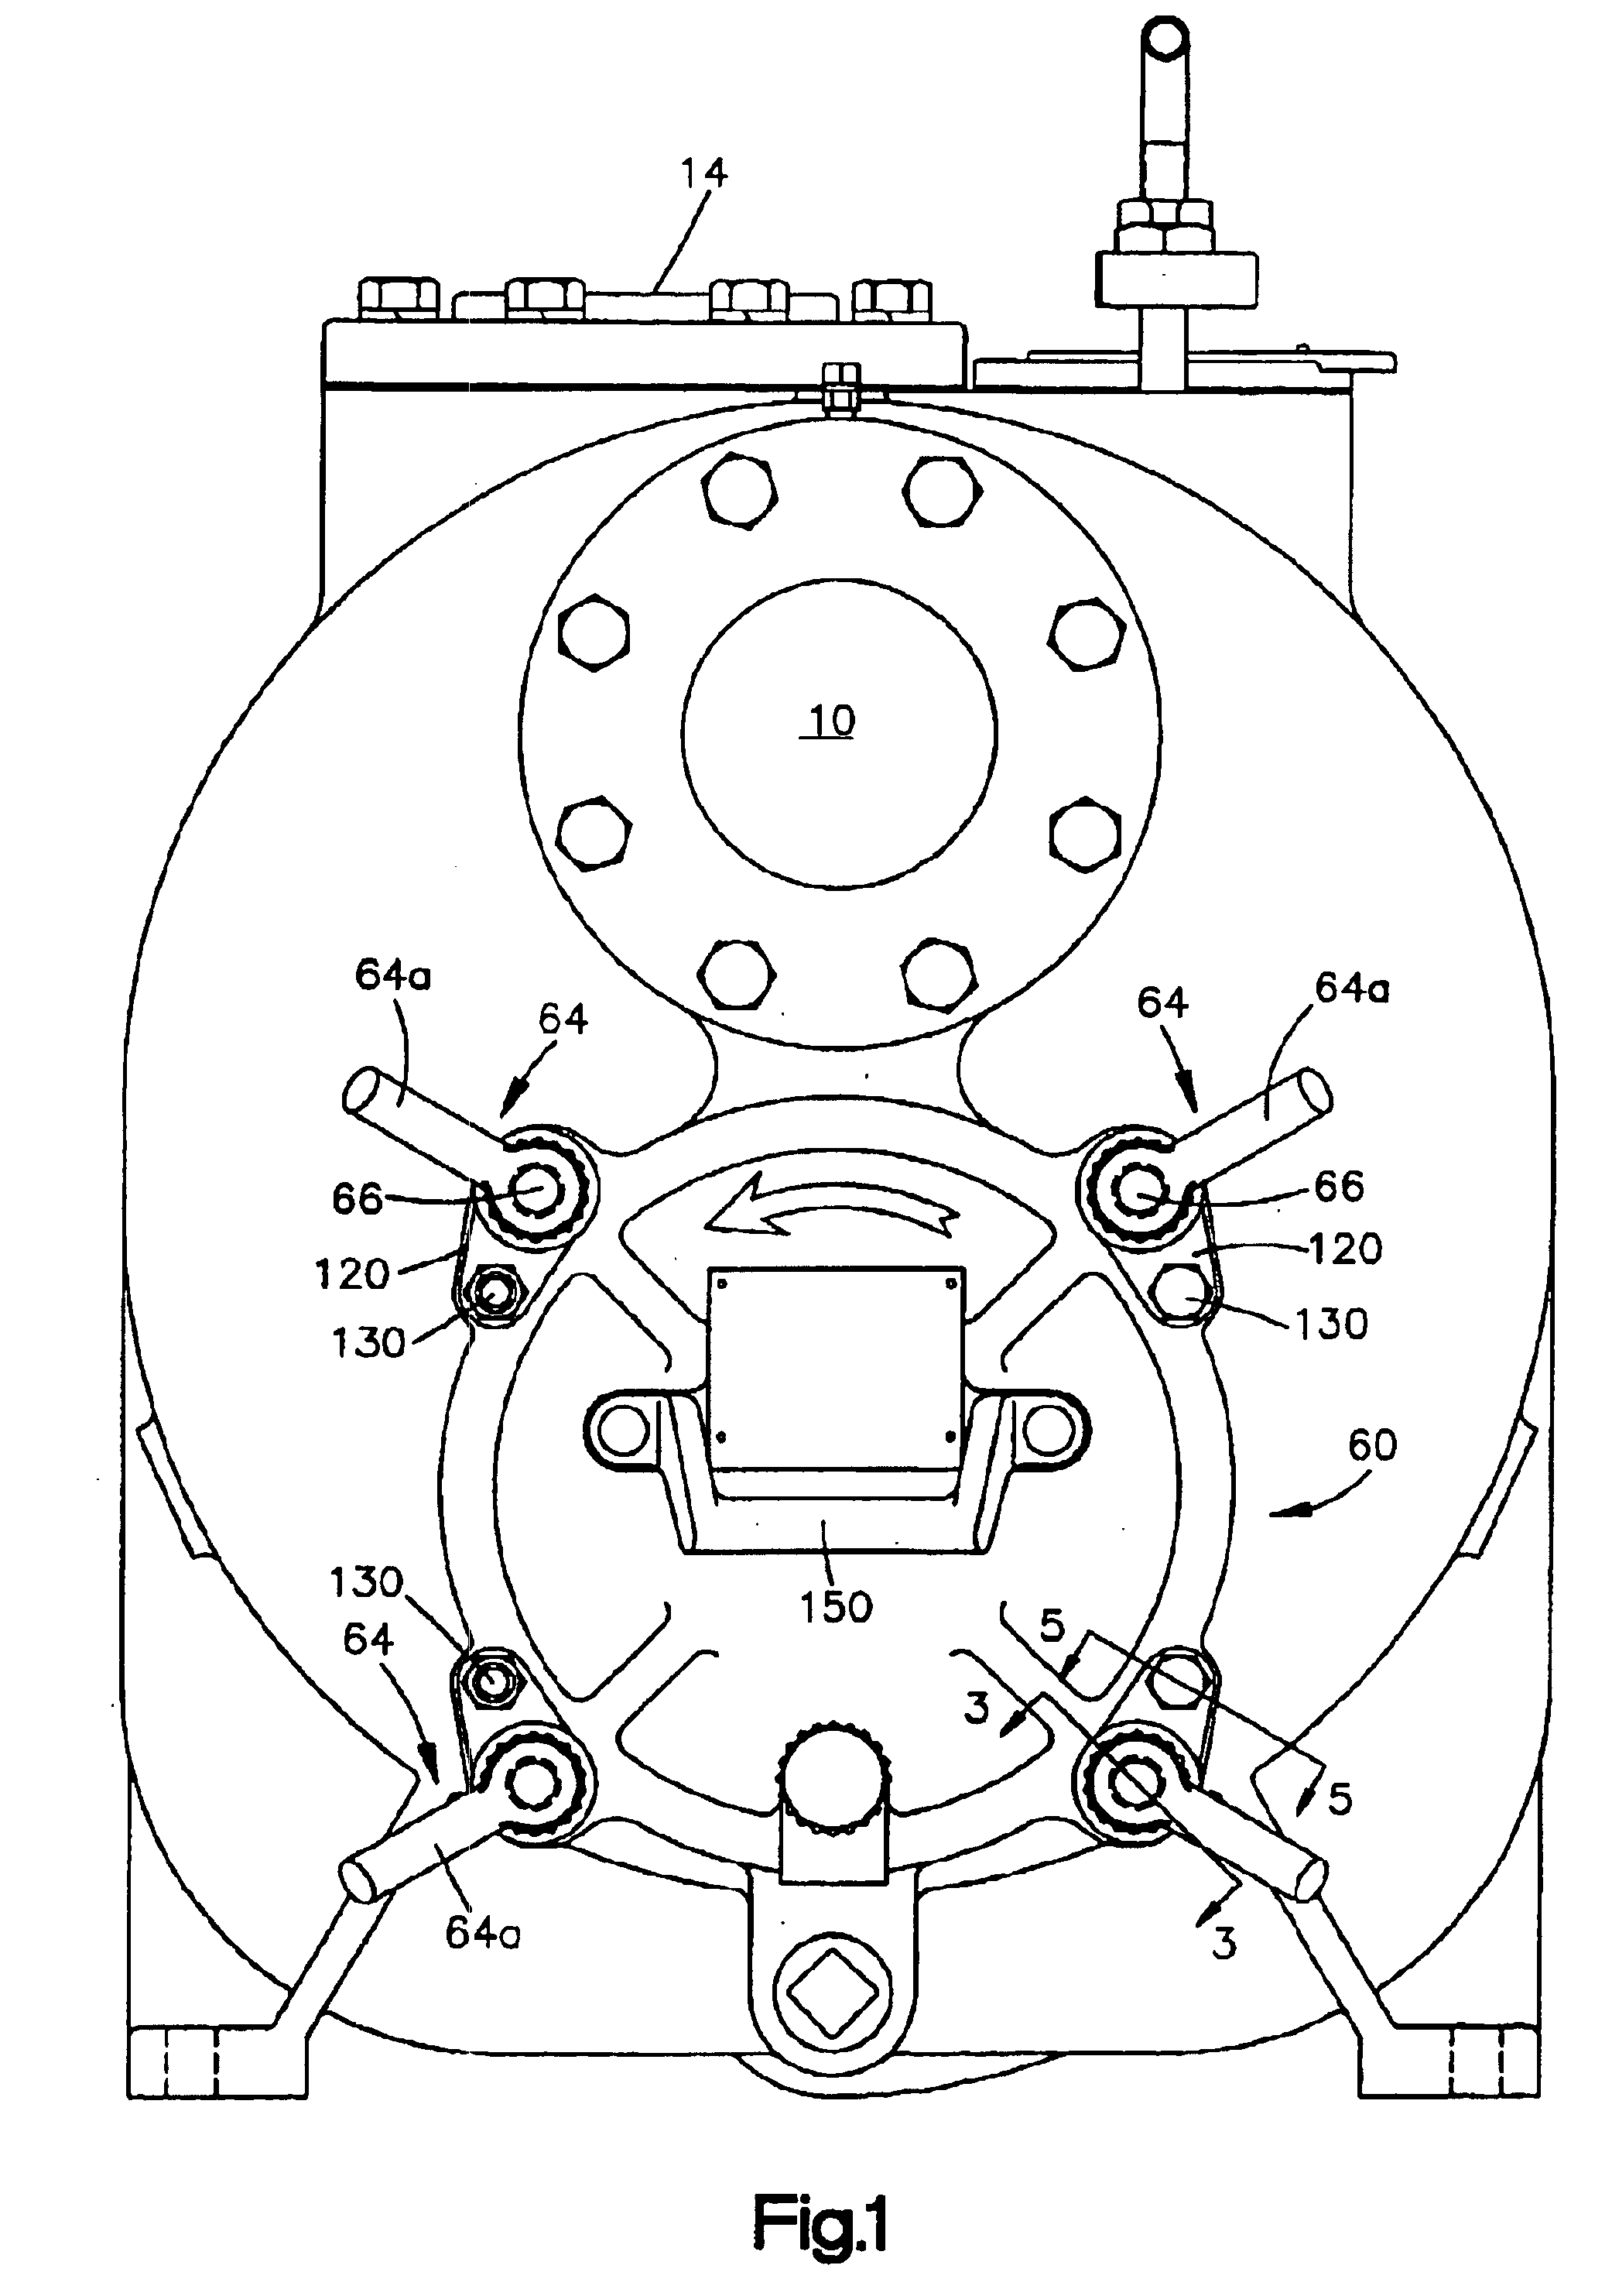 Centrifugal pump having adjustable clean-out assembly